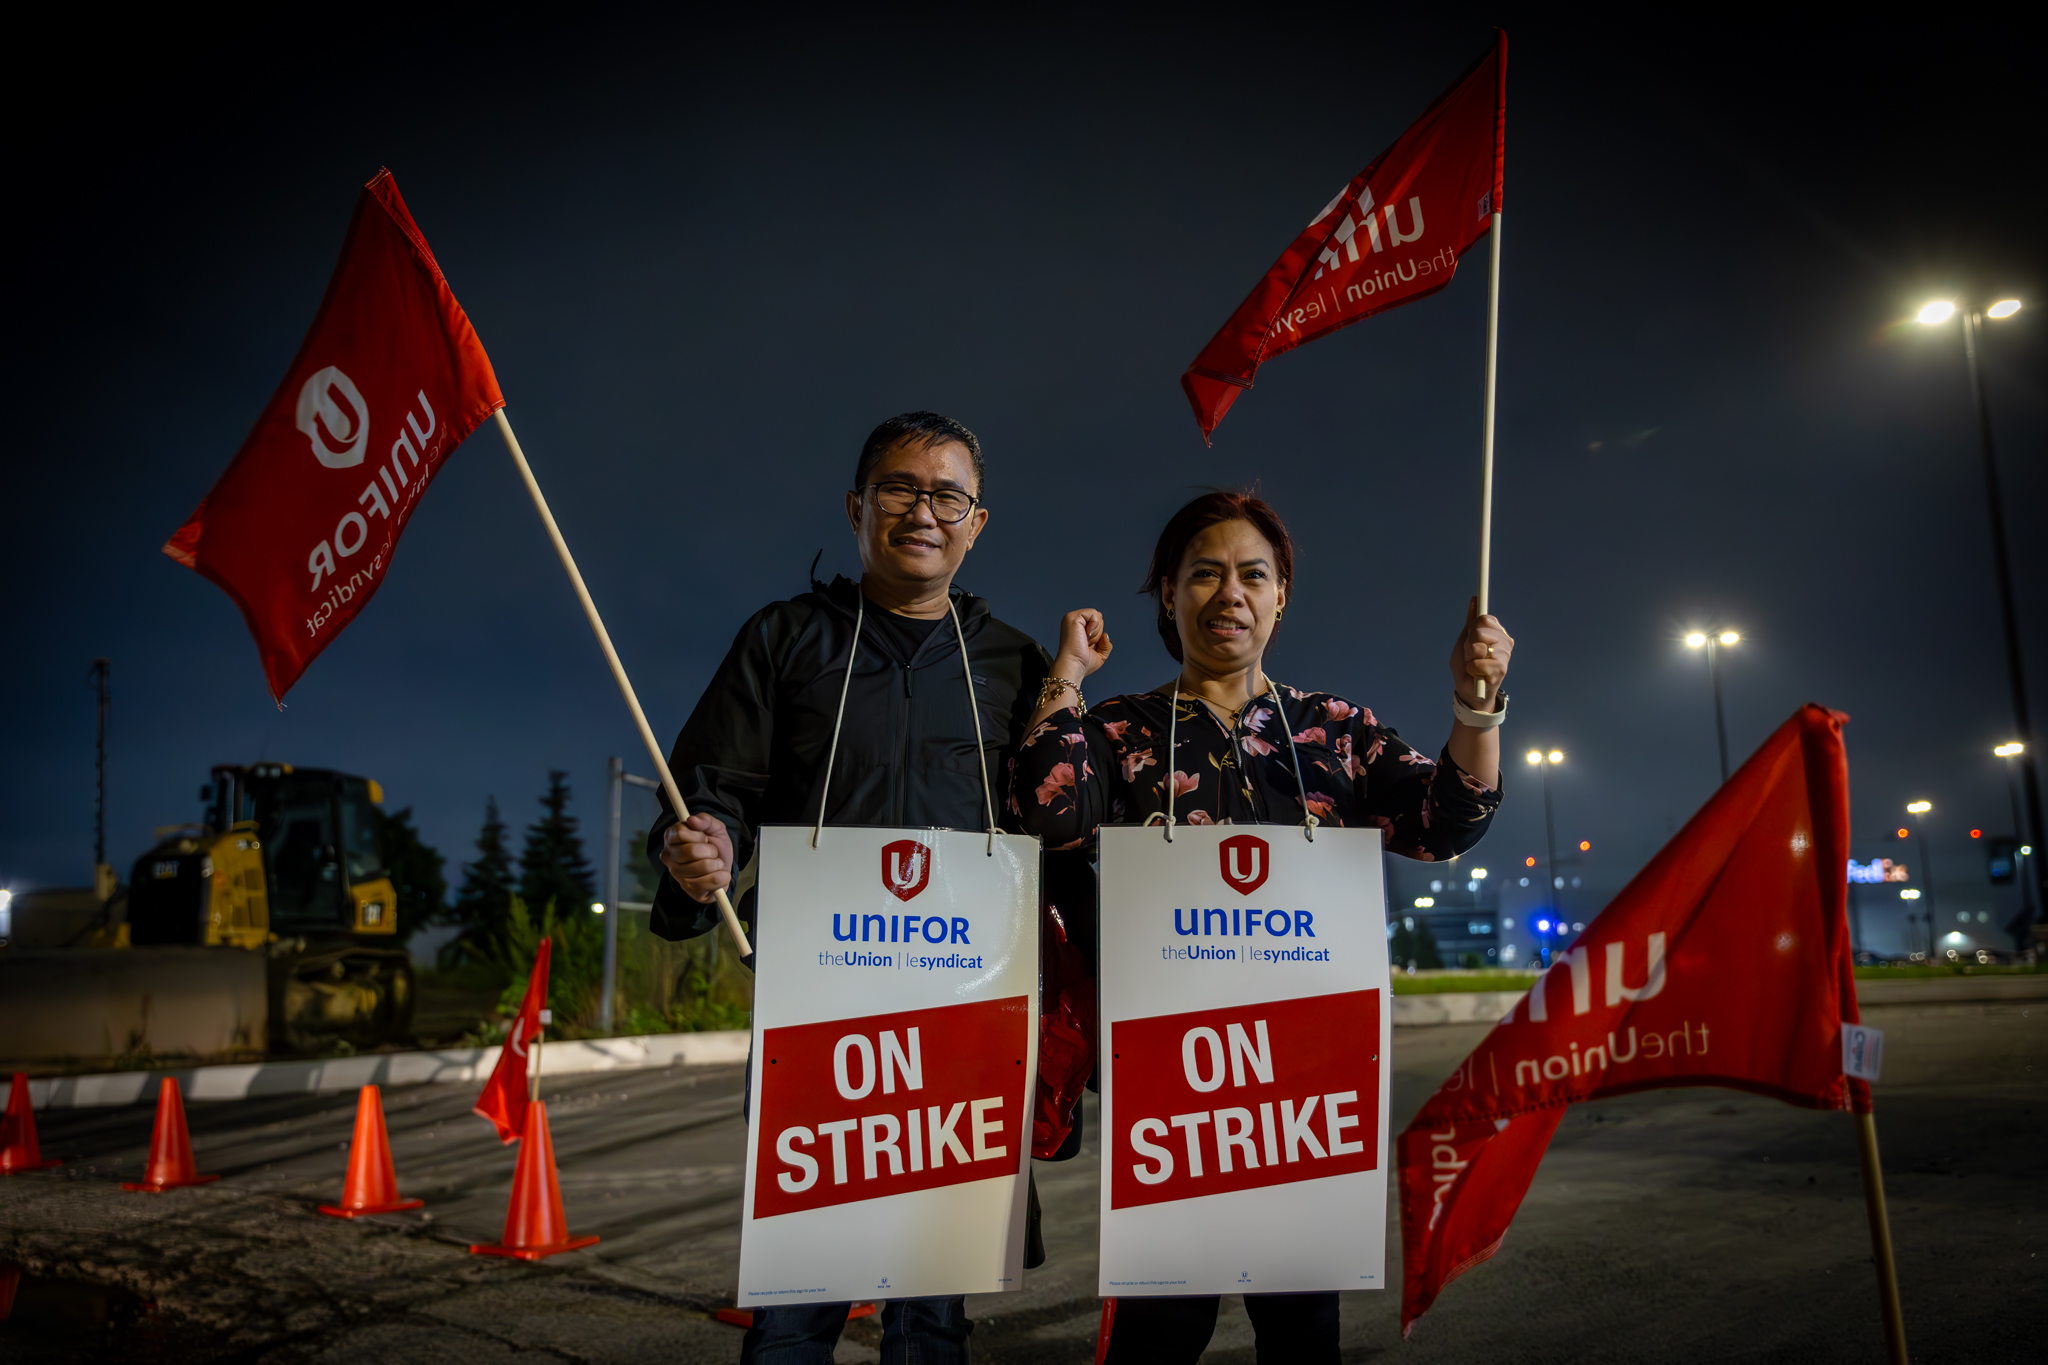 Two Unifor members standing on the Bombardier picket line wearing "on strike" signs and holding red Unifor flags.